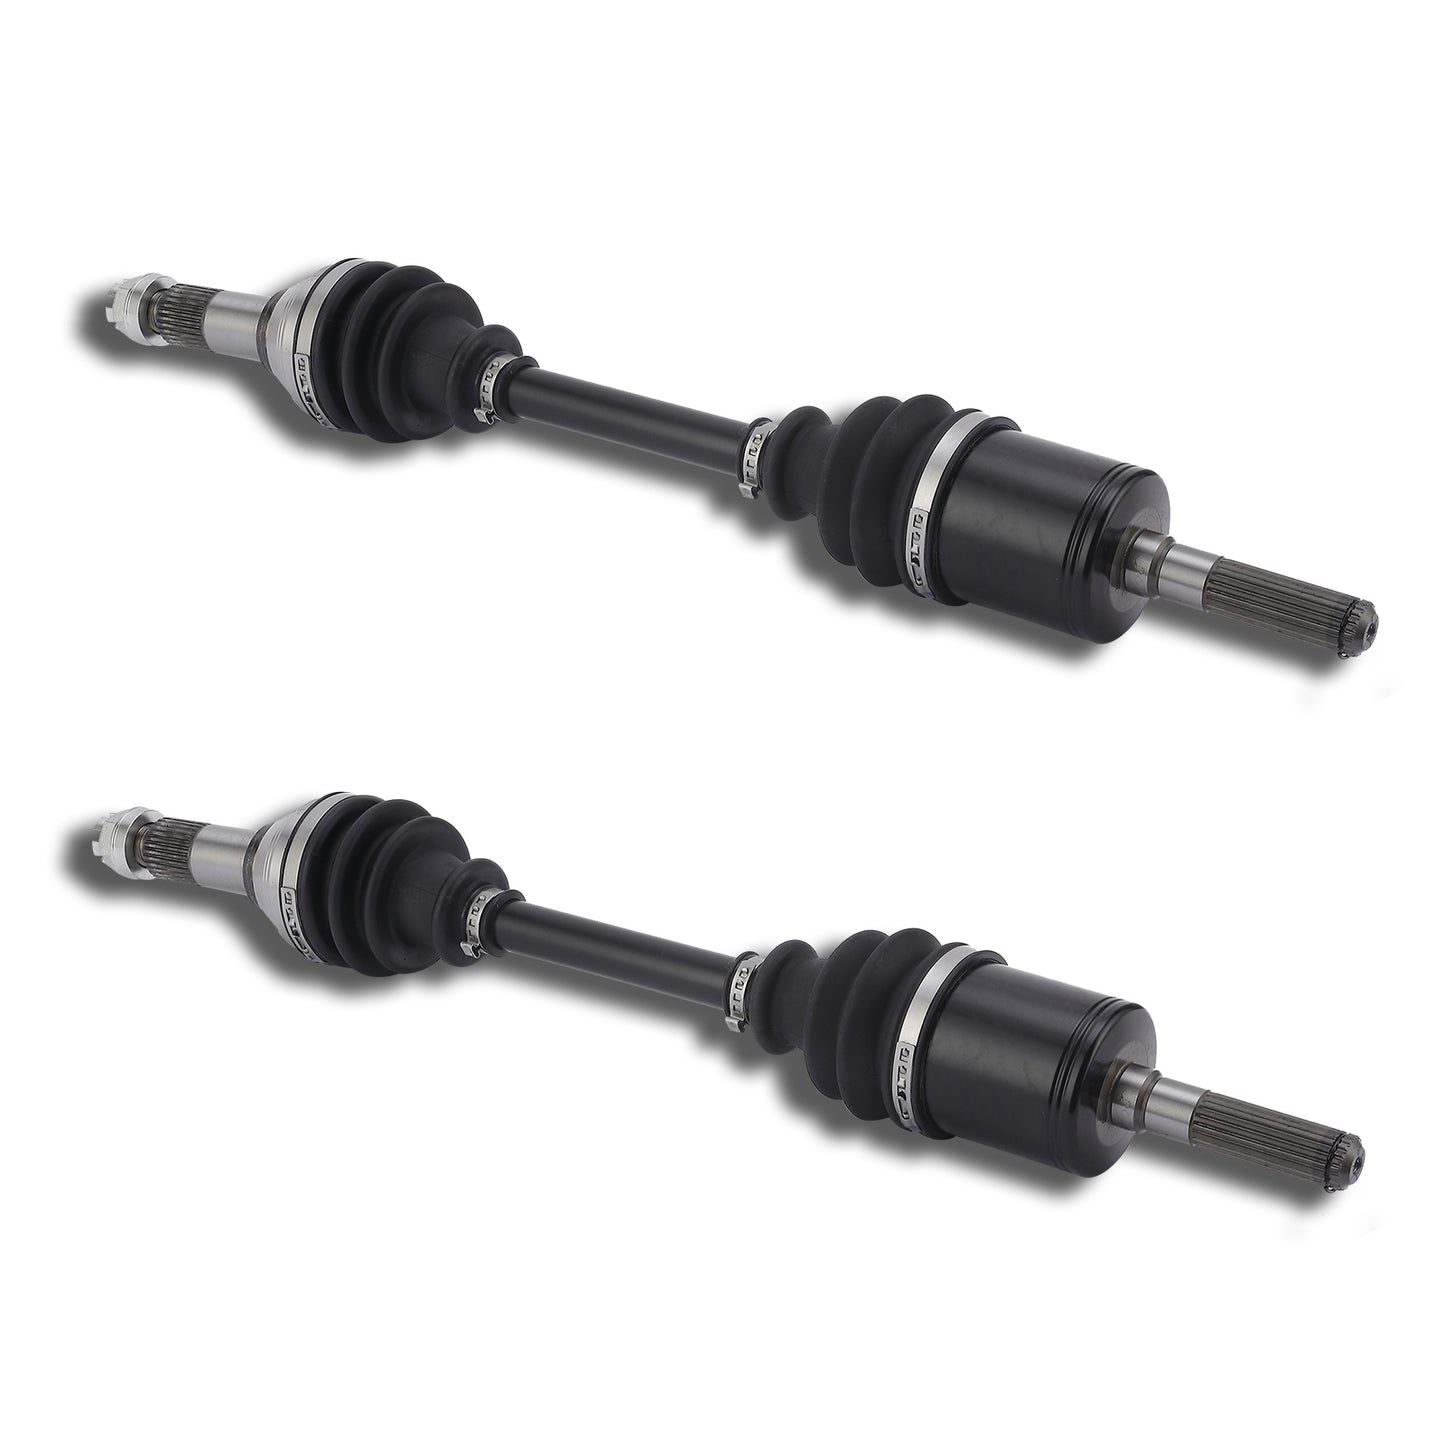 1 CAM-CA130 and 1 CAM-CA-230 Front Left Drive Shaft CV Axle for 2021-2020 MAVERICK TRAIL 800 705402008